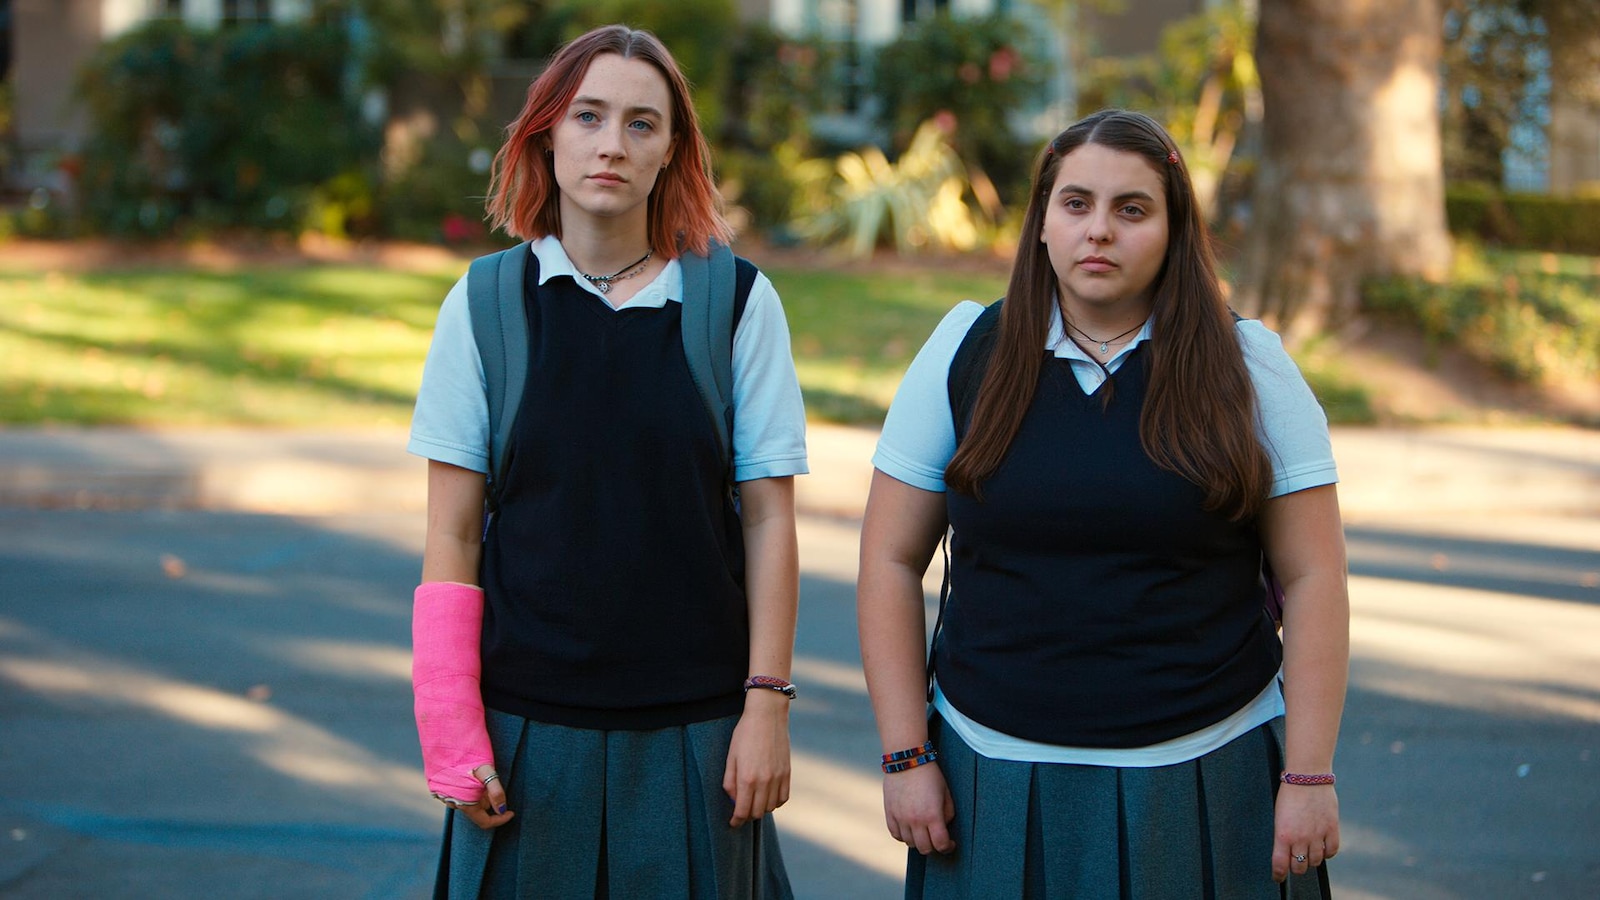 Two young women in school uniforms are walking down the street.